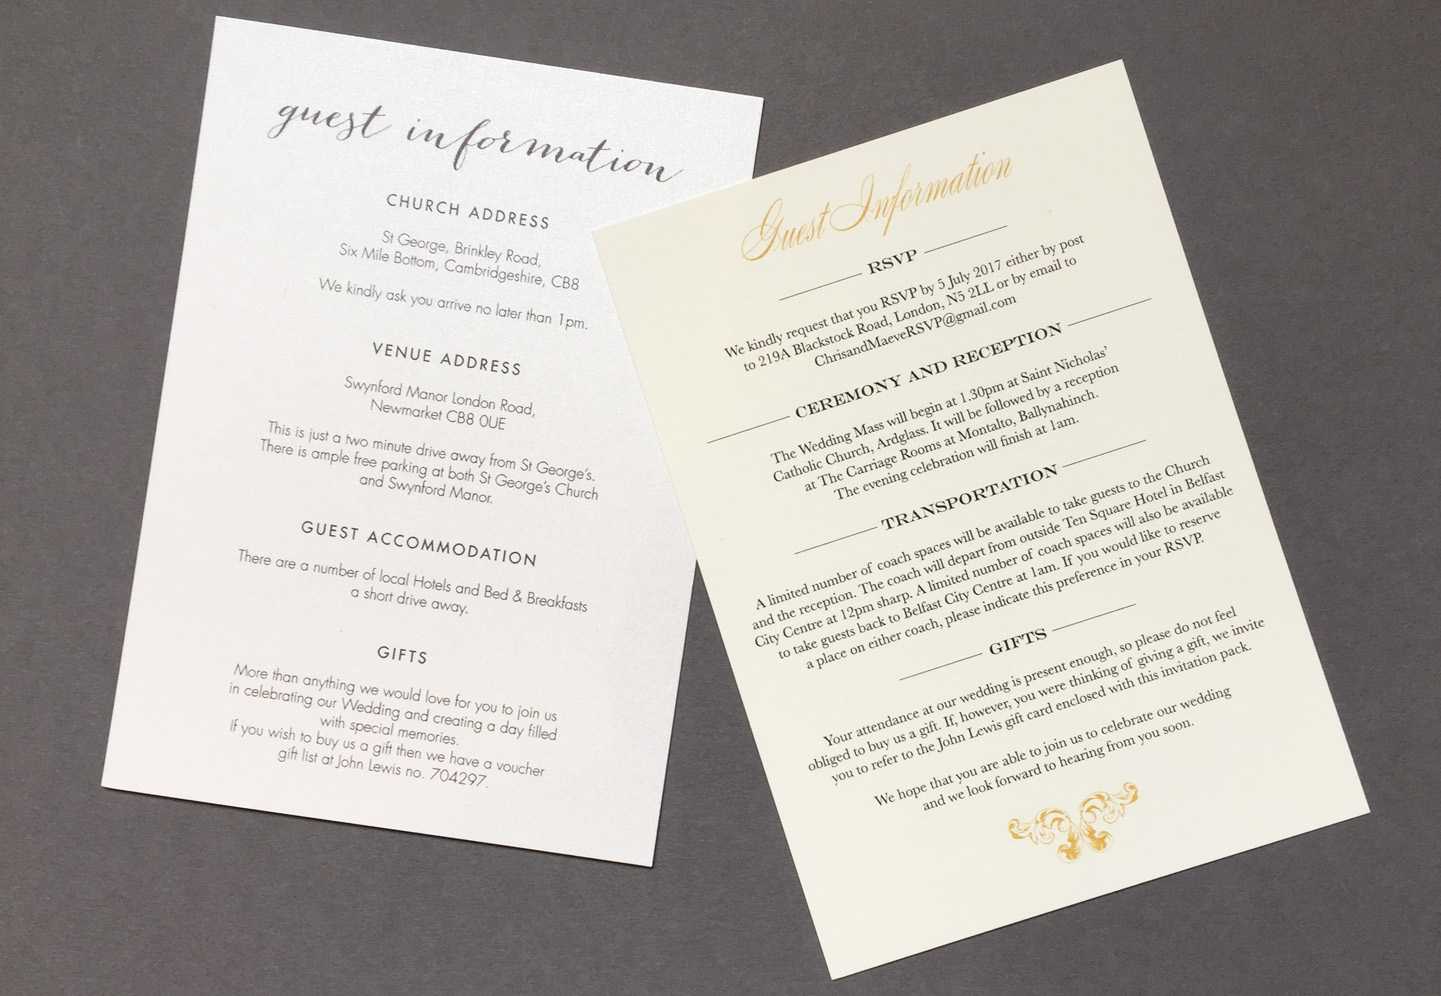 Wedding Guest Information Cards – What To Include | Foil Intended For Wedding Hotel Information Card Template